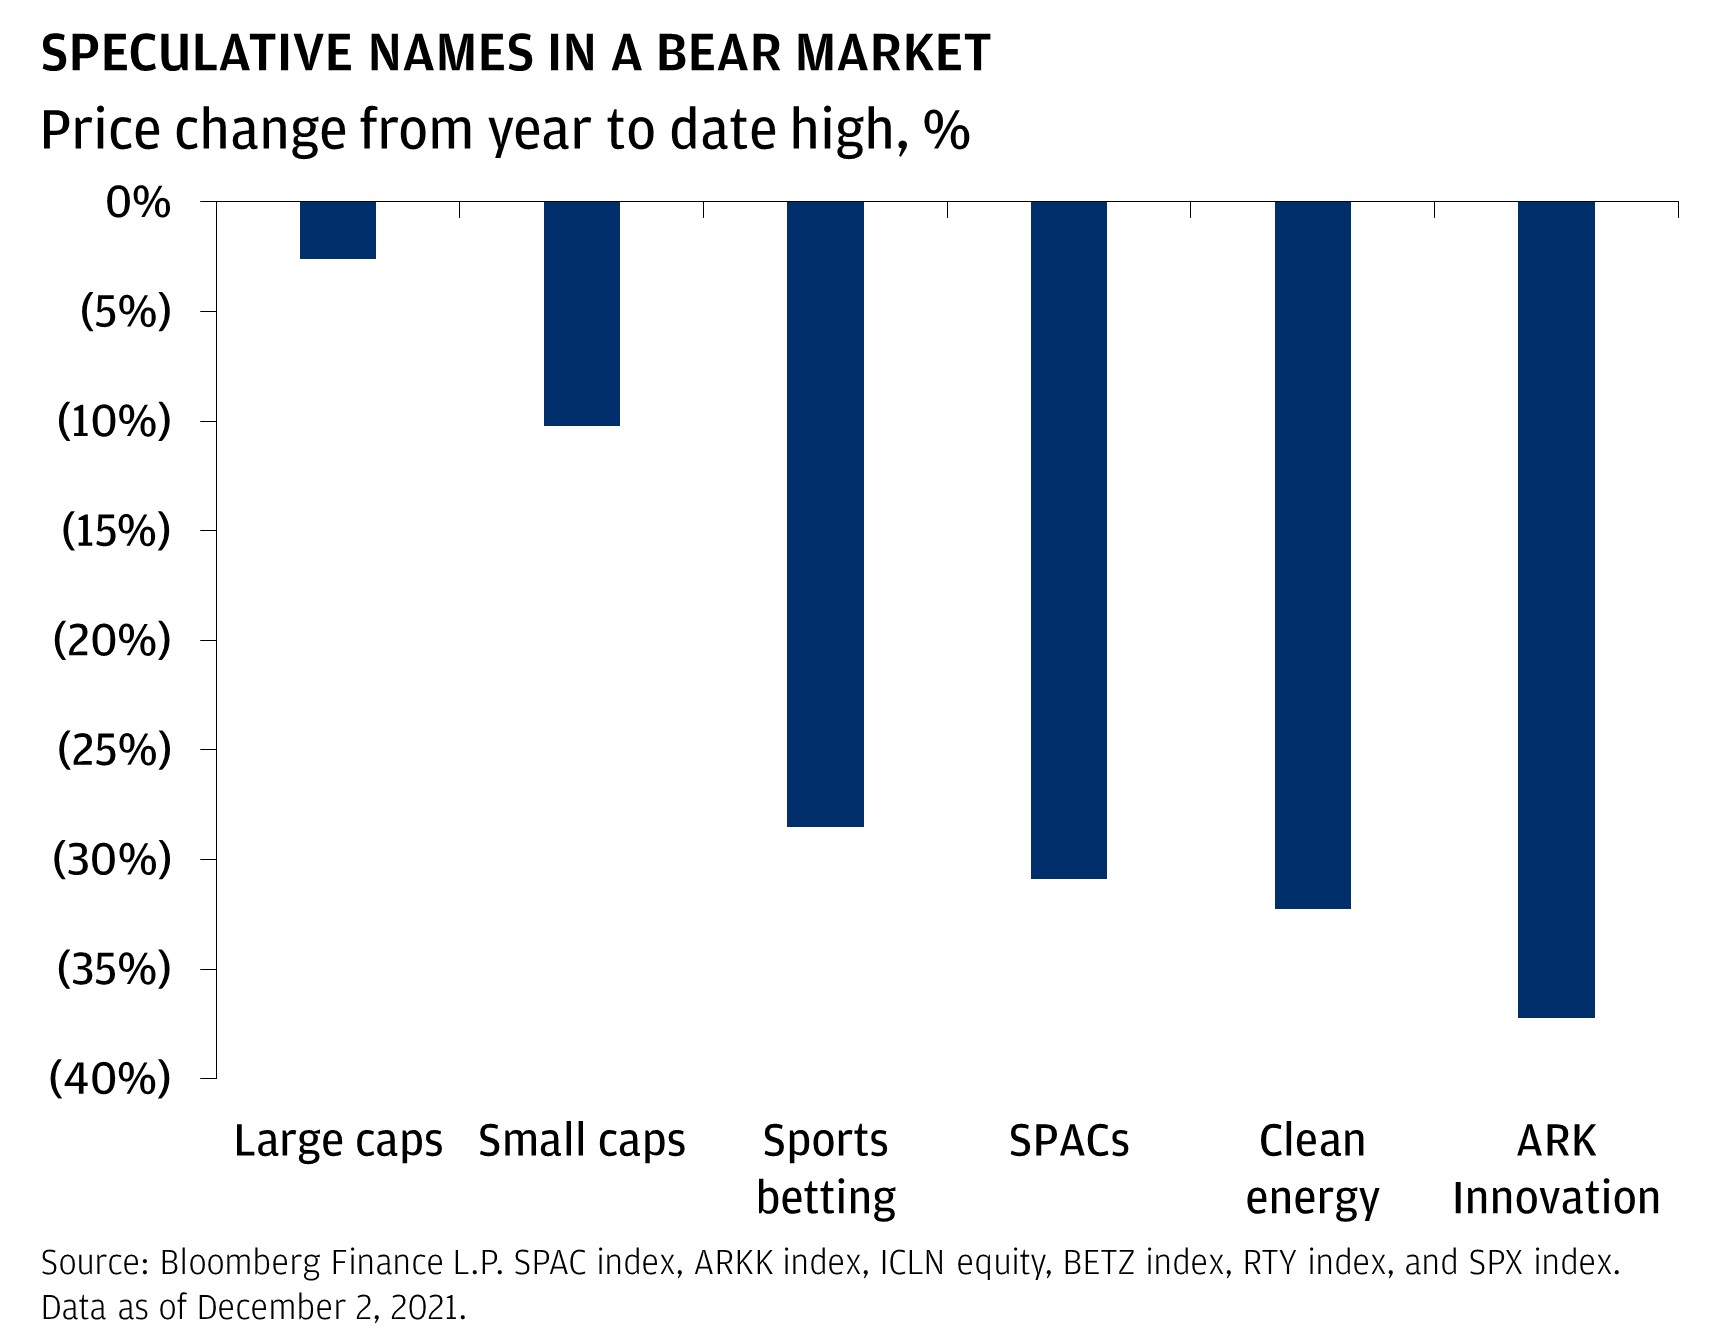 Speculative names in a bear market